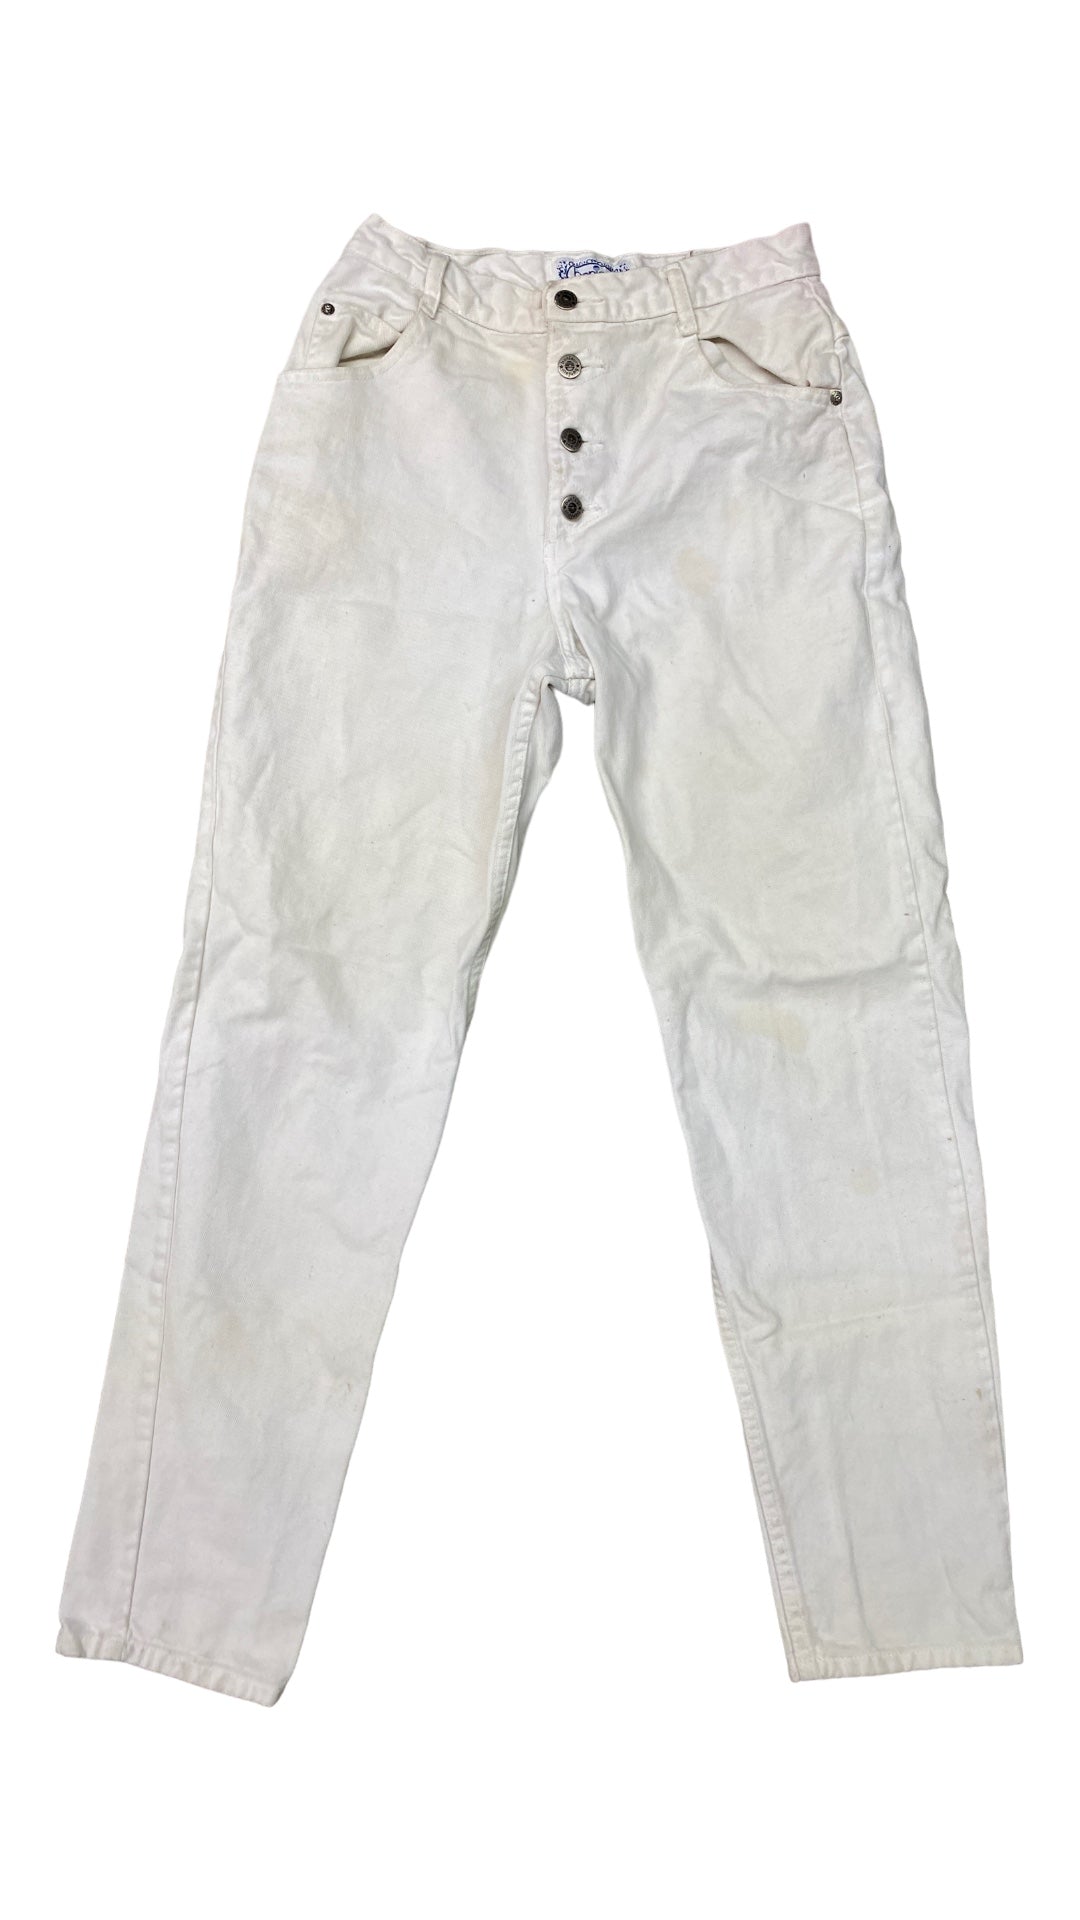 Load image into Gallery viewer, VTG Bonjour White Button Up Pants Sz 26x28
